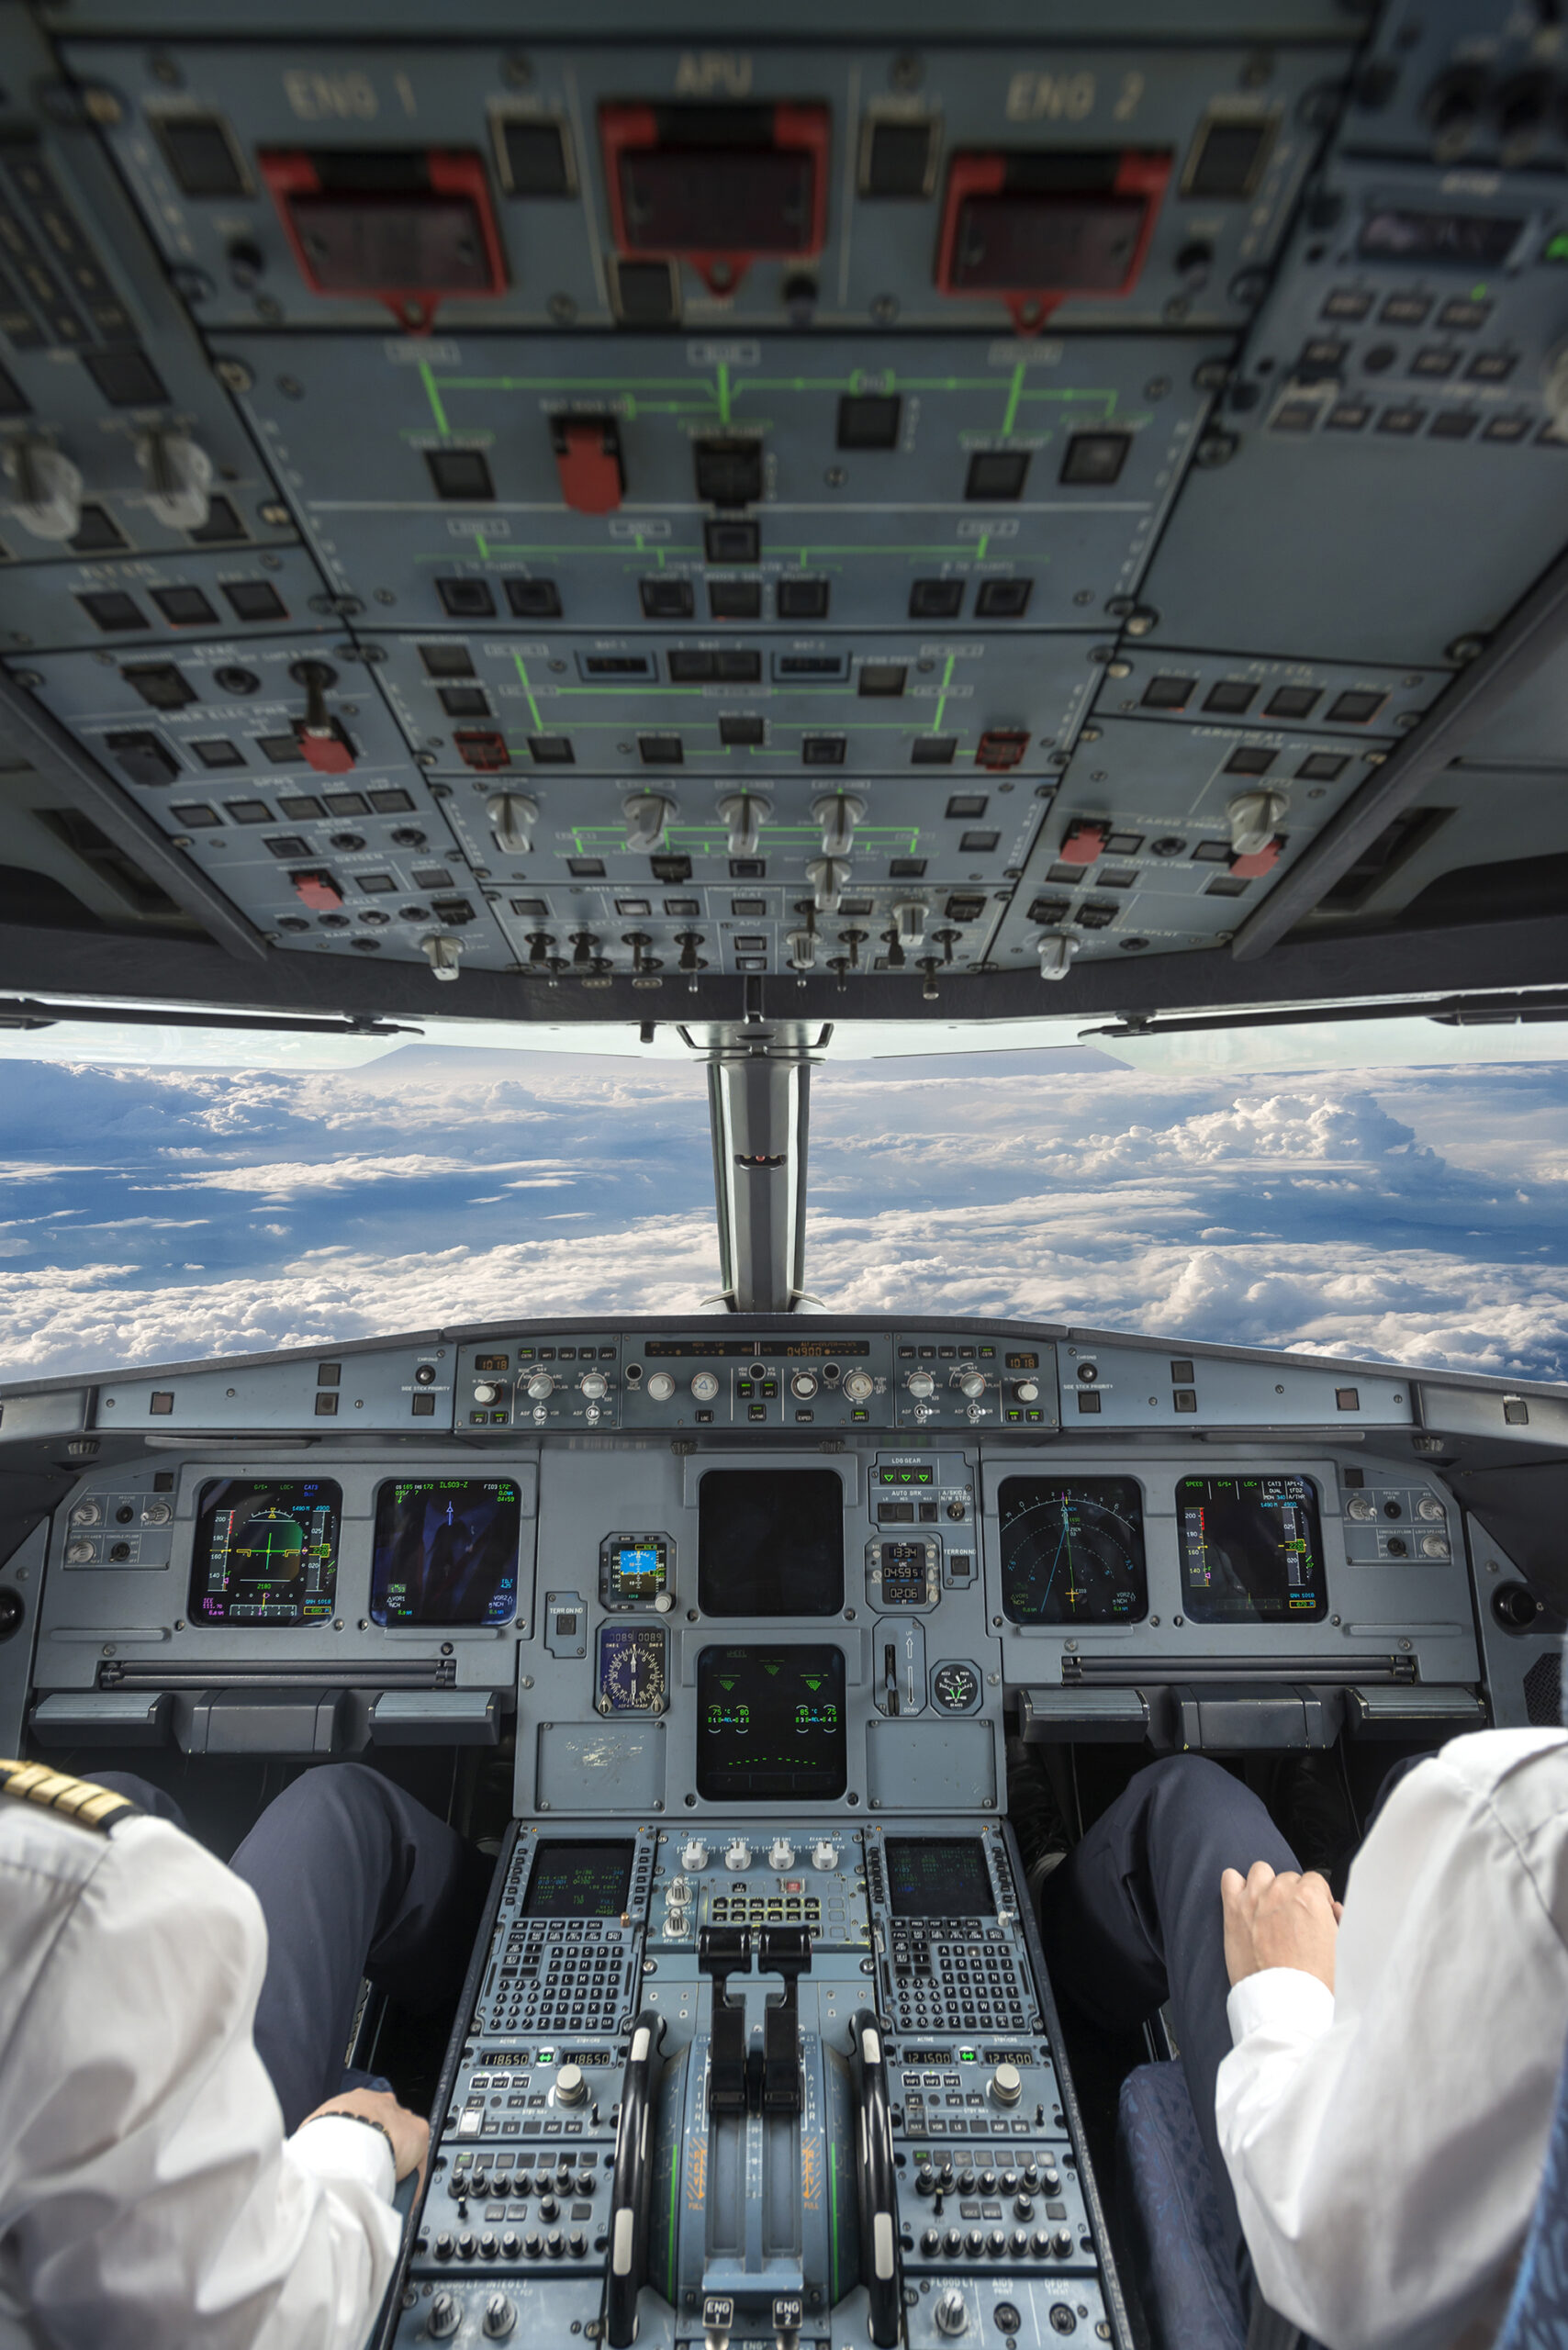 The interior of a plane's cockpit looking over rolling hills